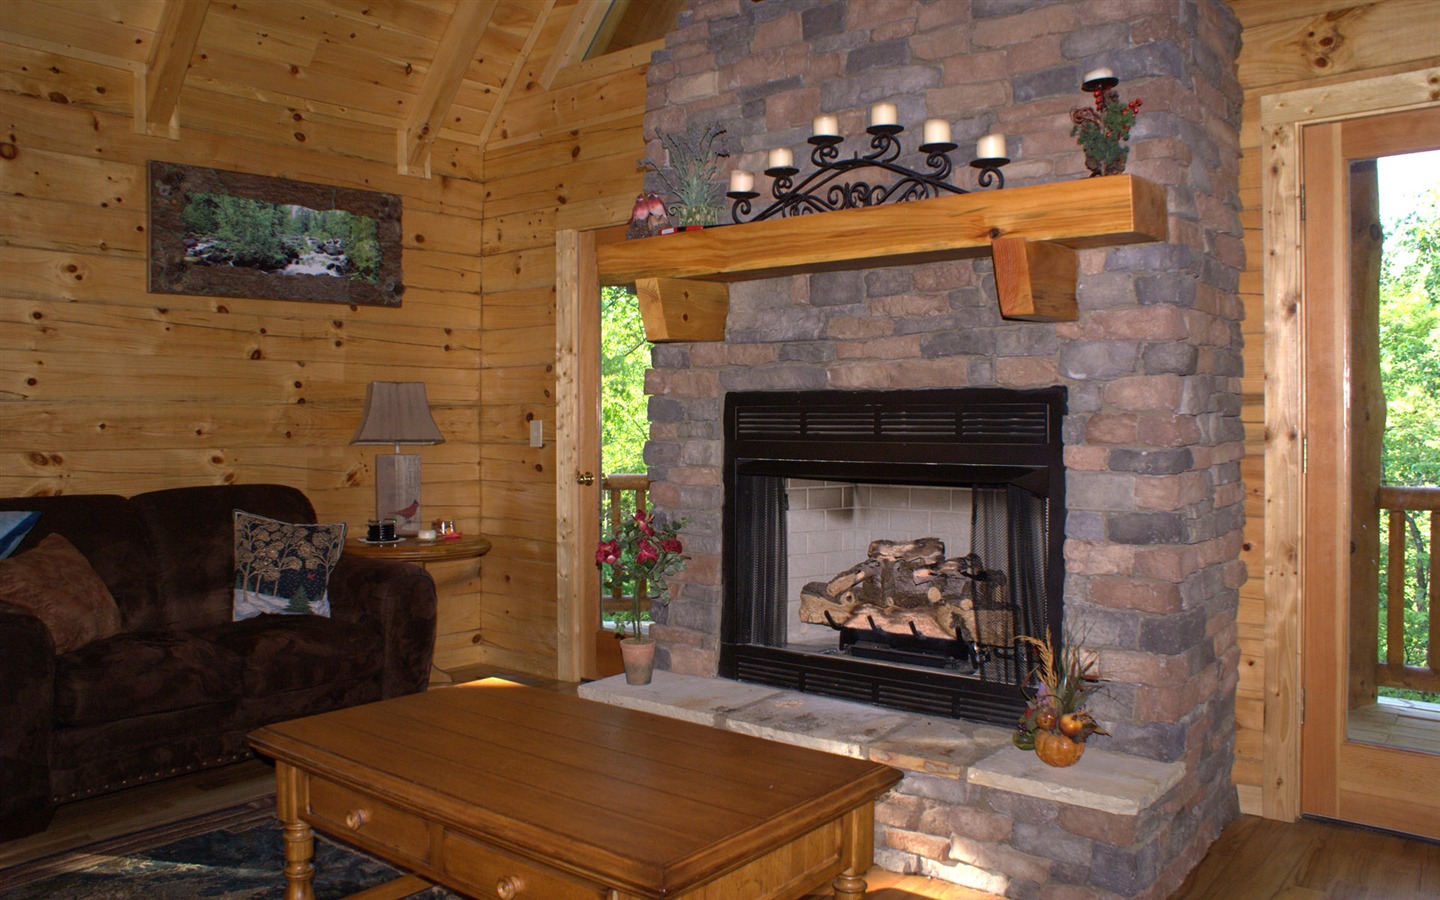 Western-style family fireplace wallpaper (1) #12 - 1440x900